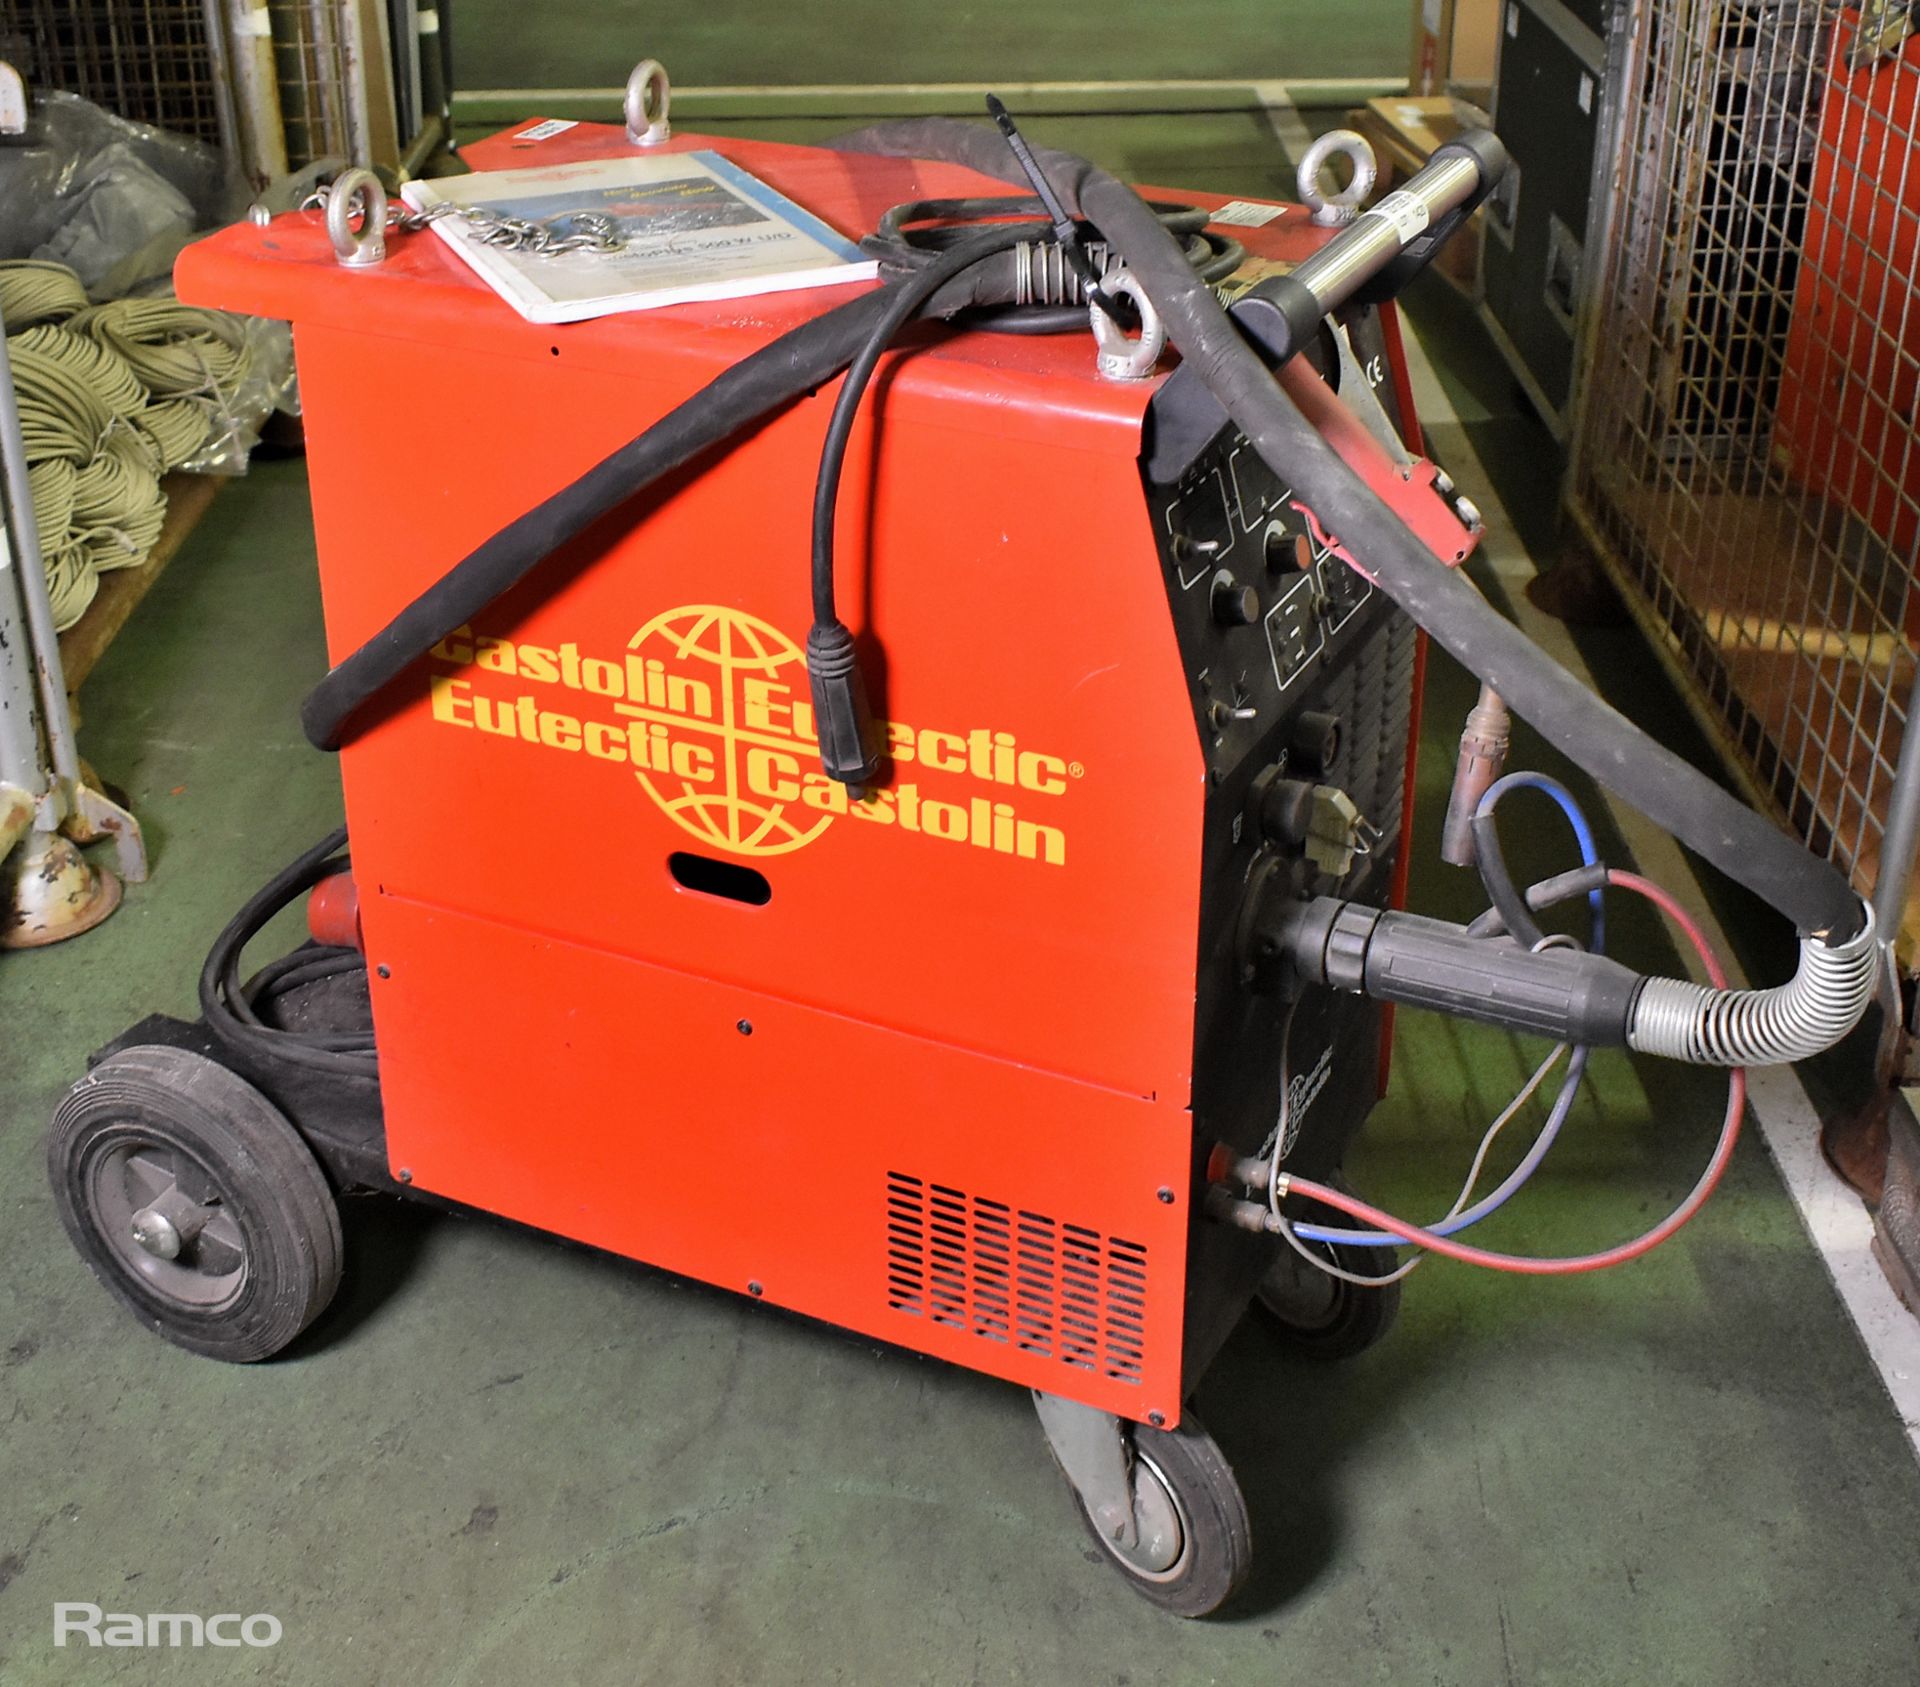 CastoPlus 500W TotalArc2-3000 mig welder with instruction manual - L 900 x W 500 x H 900mm - Image 4 of 10